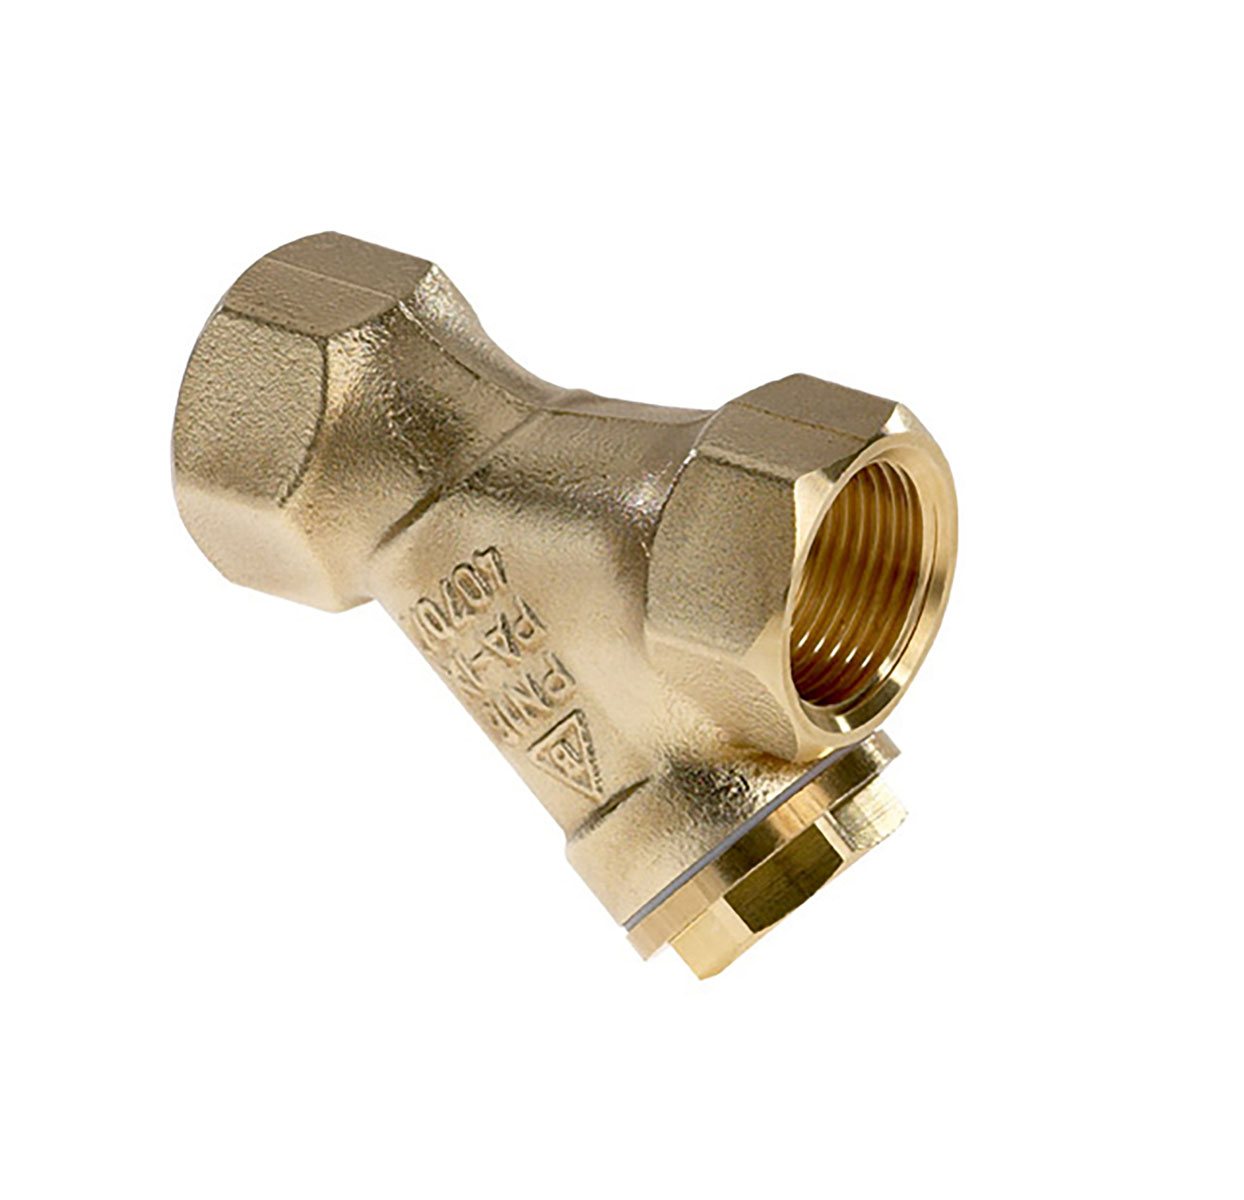 1450400 - CR-Brass Strainer Strainer with PTFE-sealing (Teflon)